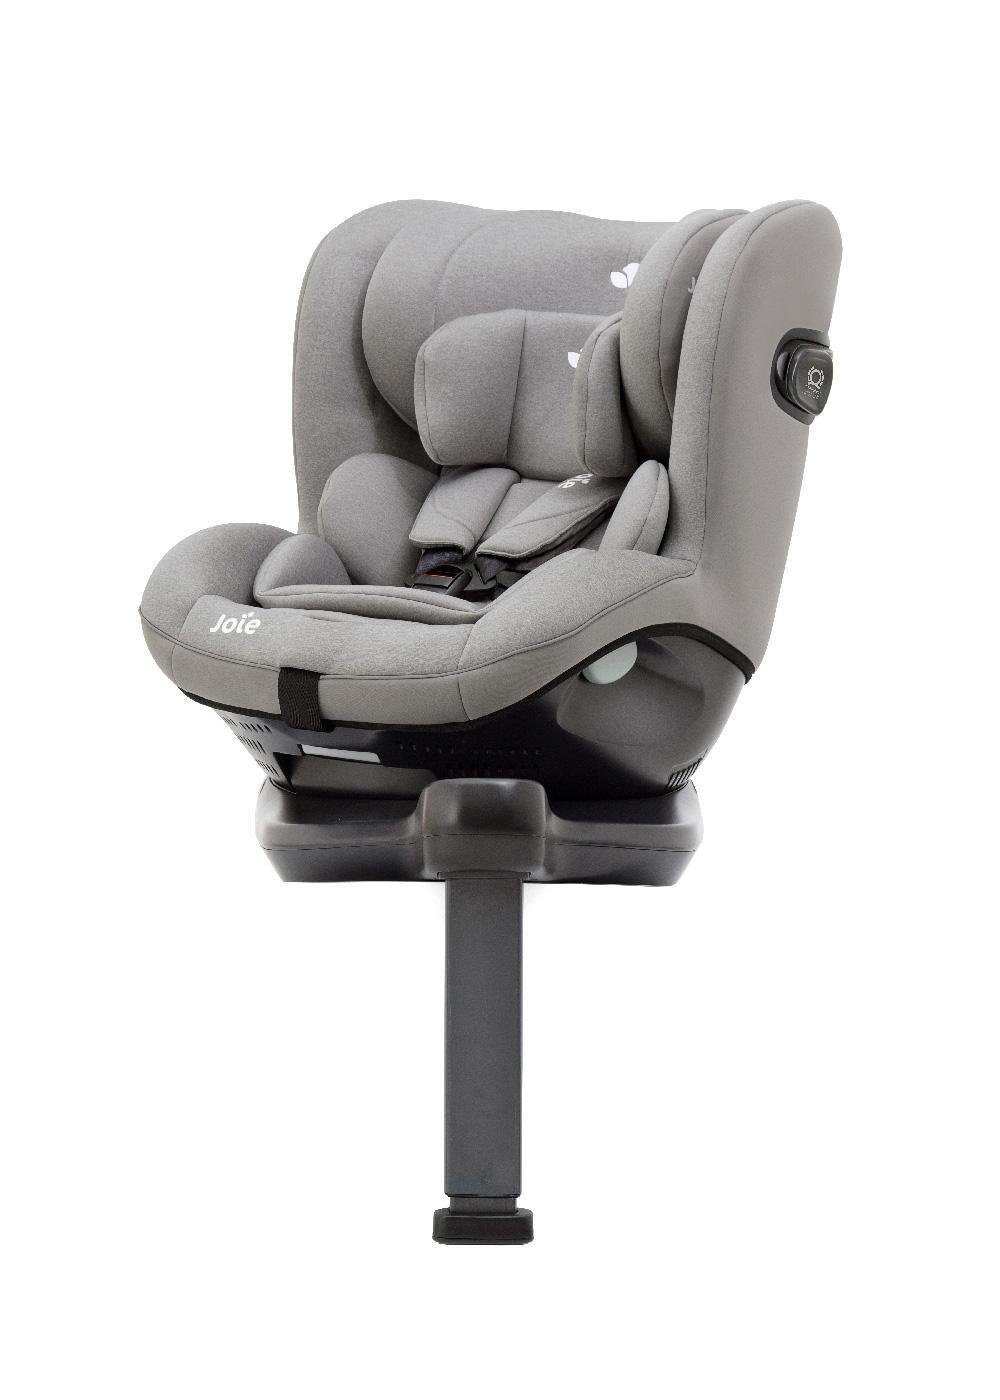 Joie i-Spin 360 isofix car seat (40-105cm), Childseat Grey Flannel